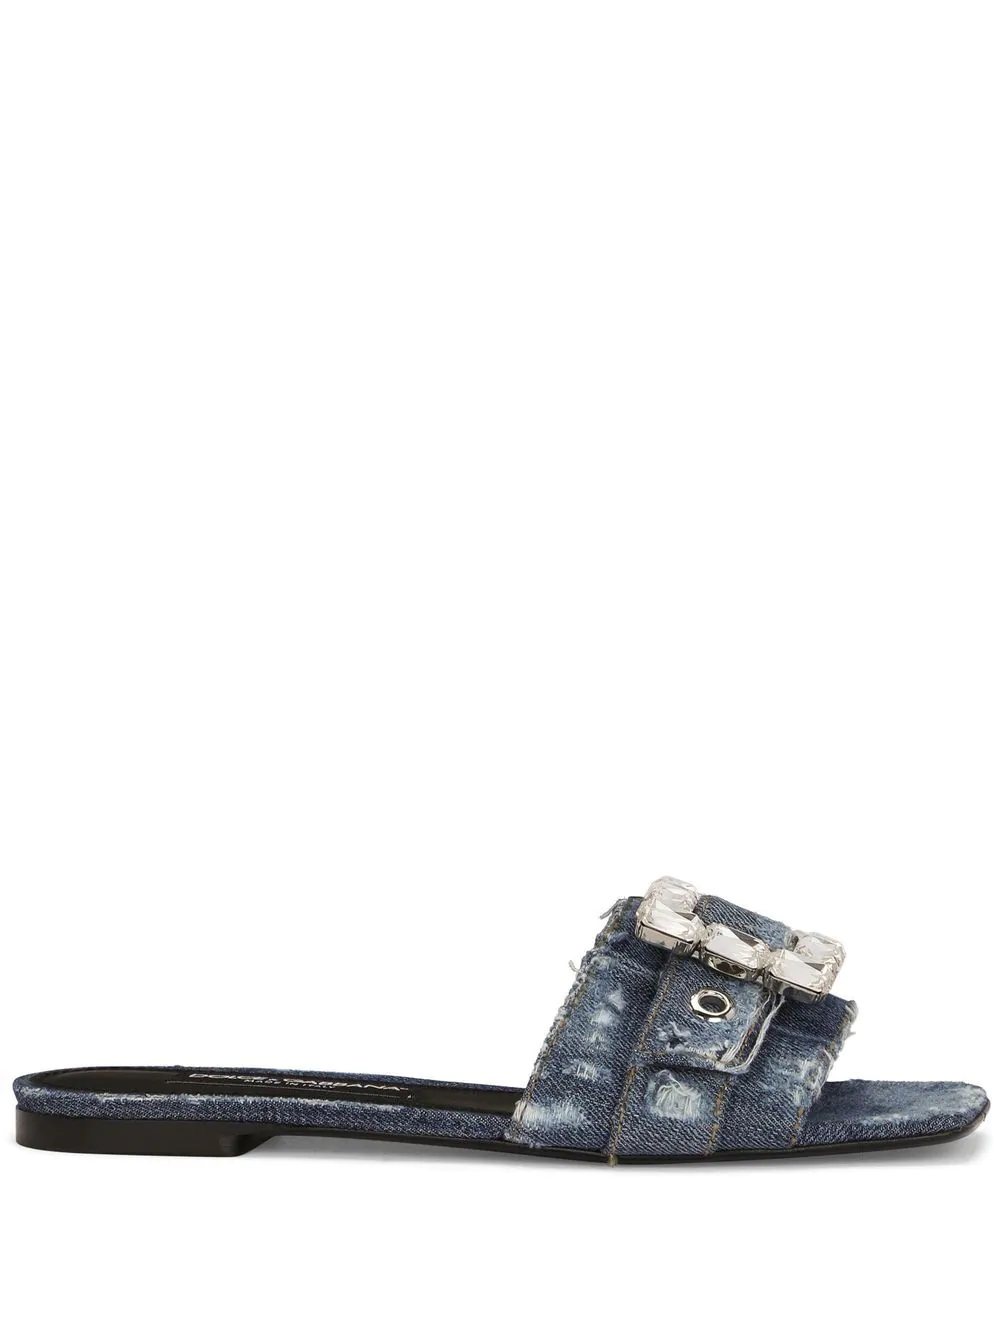 DOLCE & GABBANA SLIDE SANDALS WITH BUCKLE